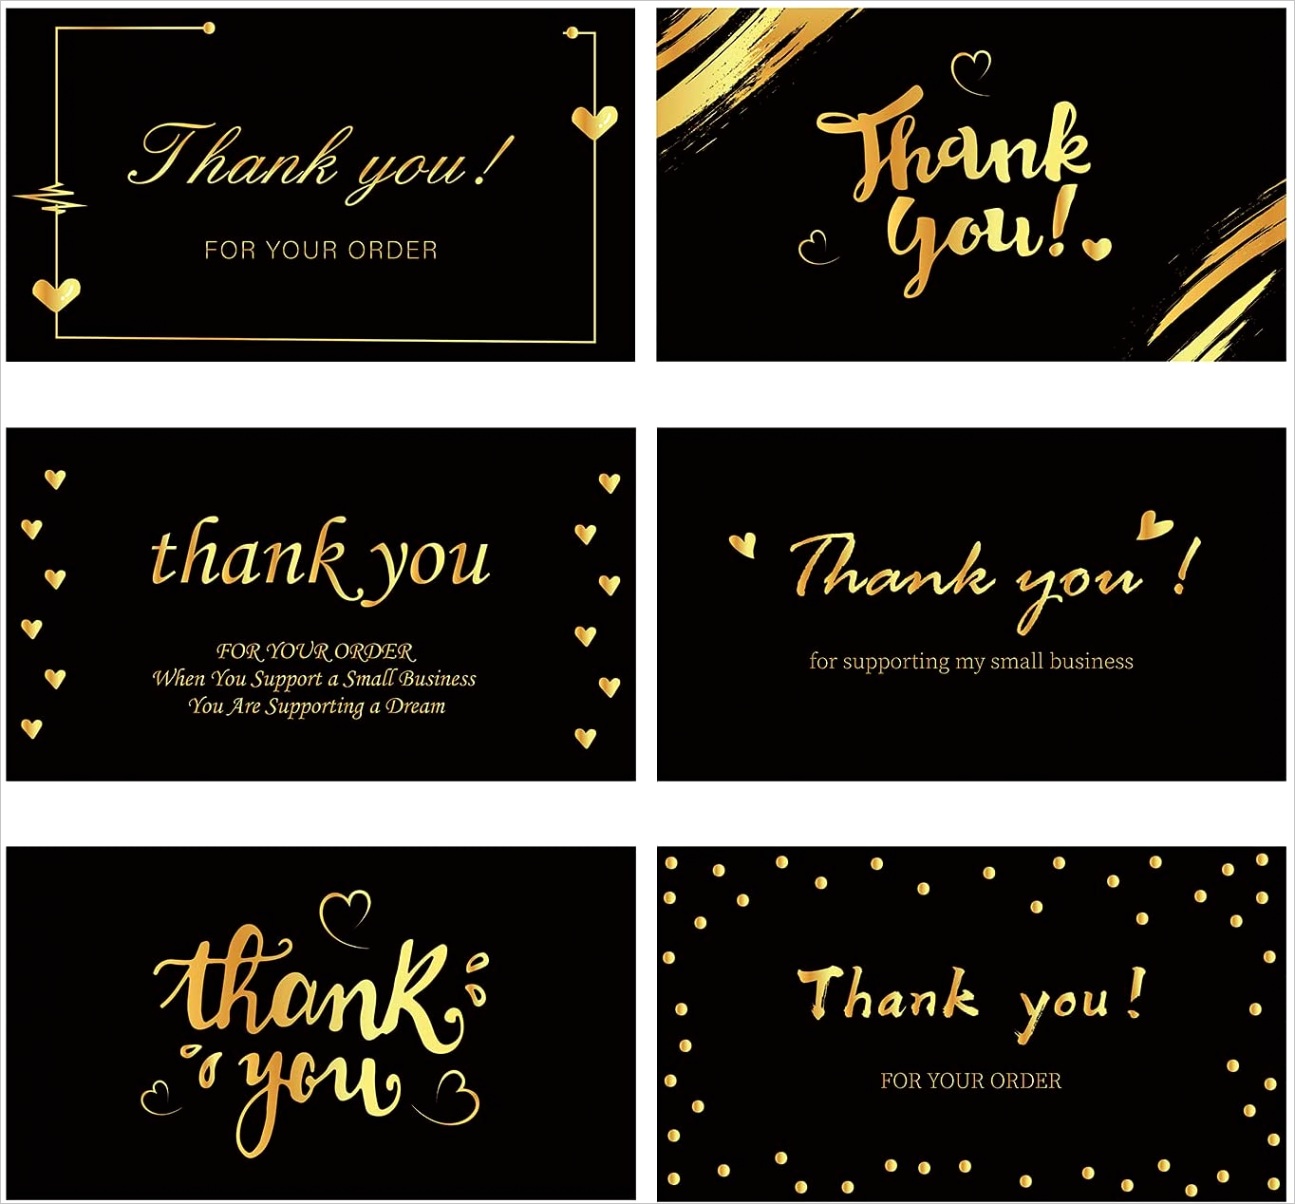 1CTR30R8C 252 thank you for supporting my small business cards 6 elegant gold foil design thank you for your order appreciation cards for small business